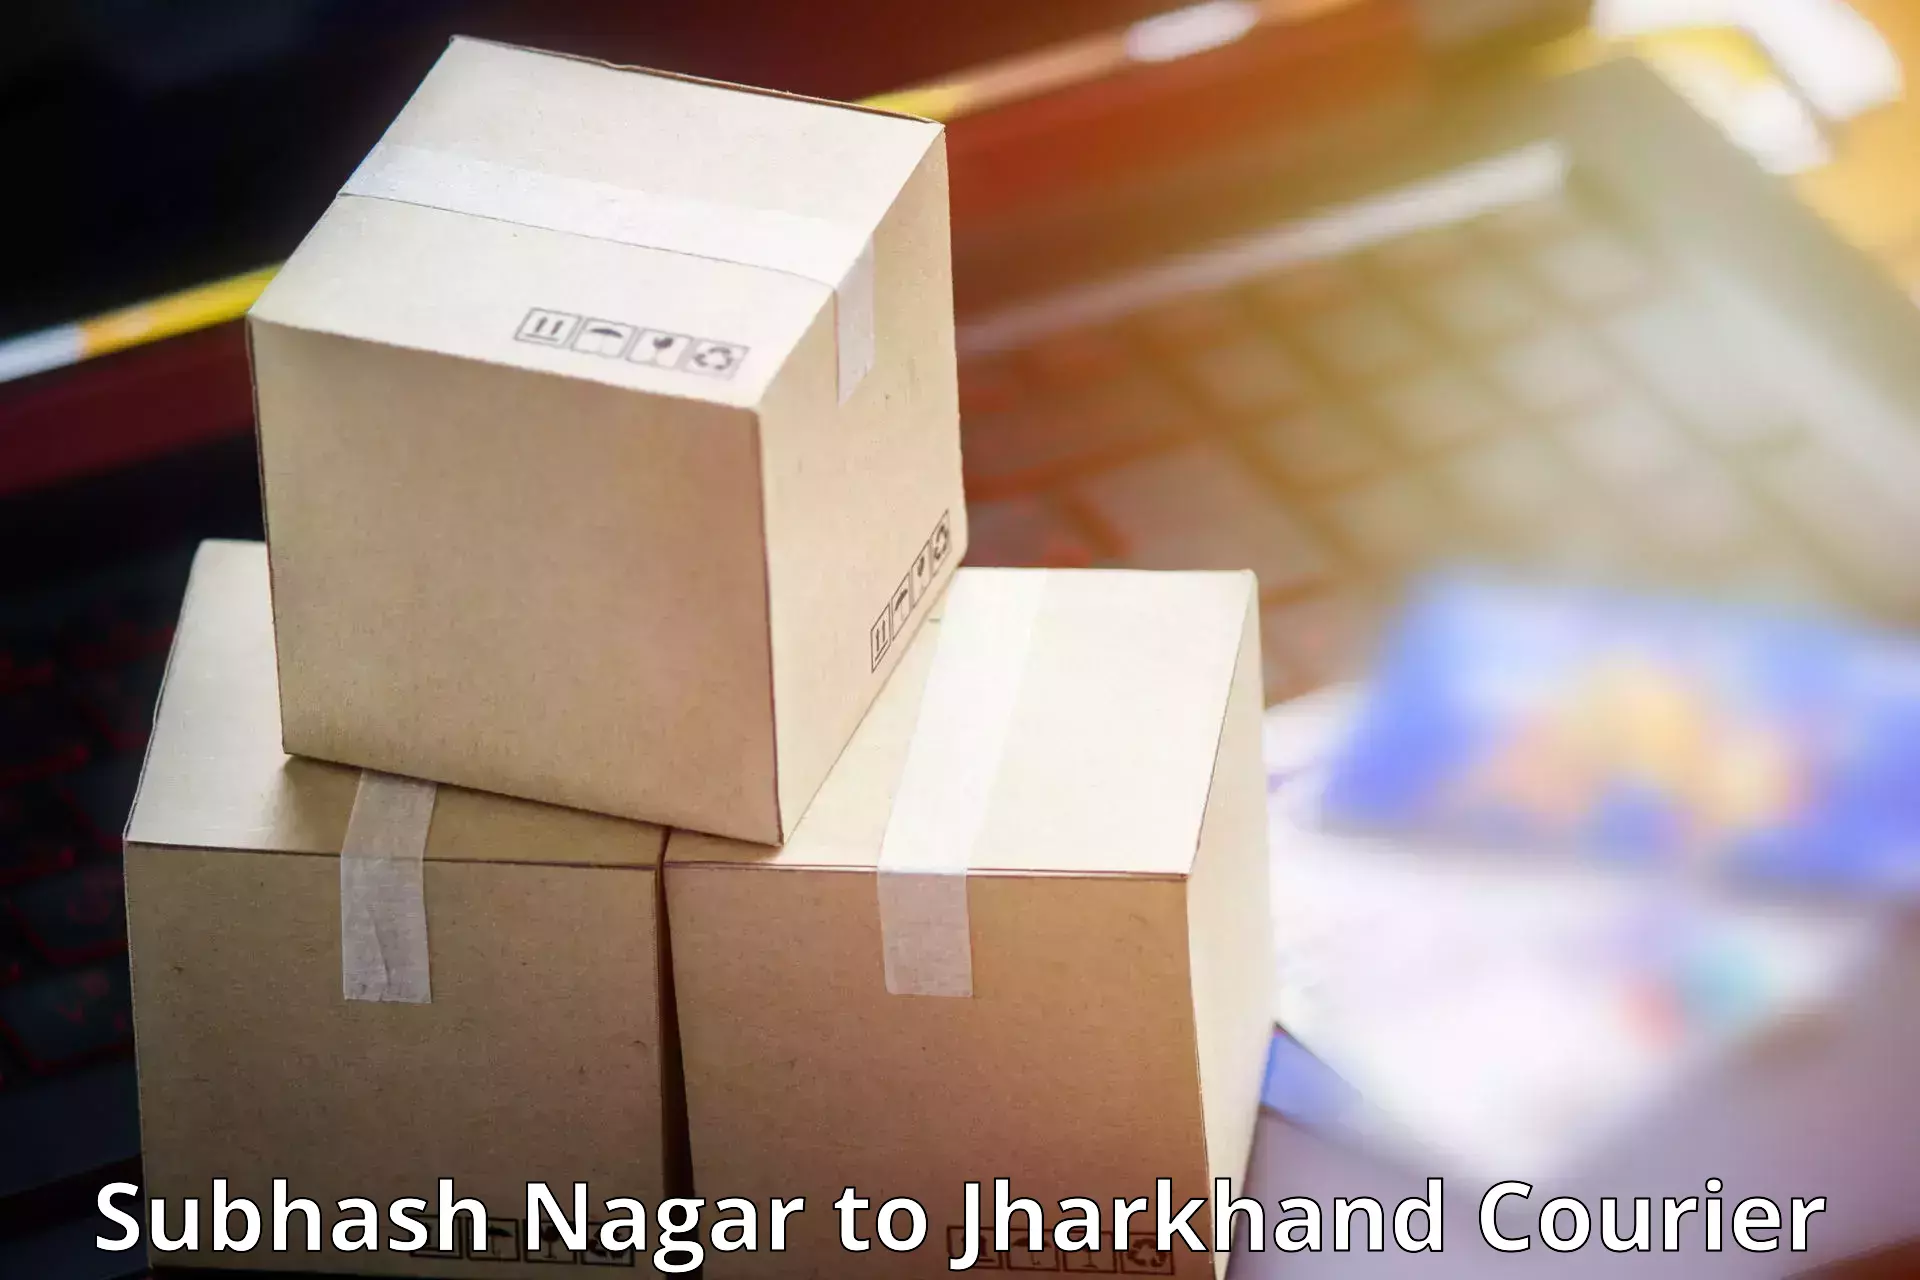 Express delivery capabilities in Subhash Nagar to Tandwa